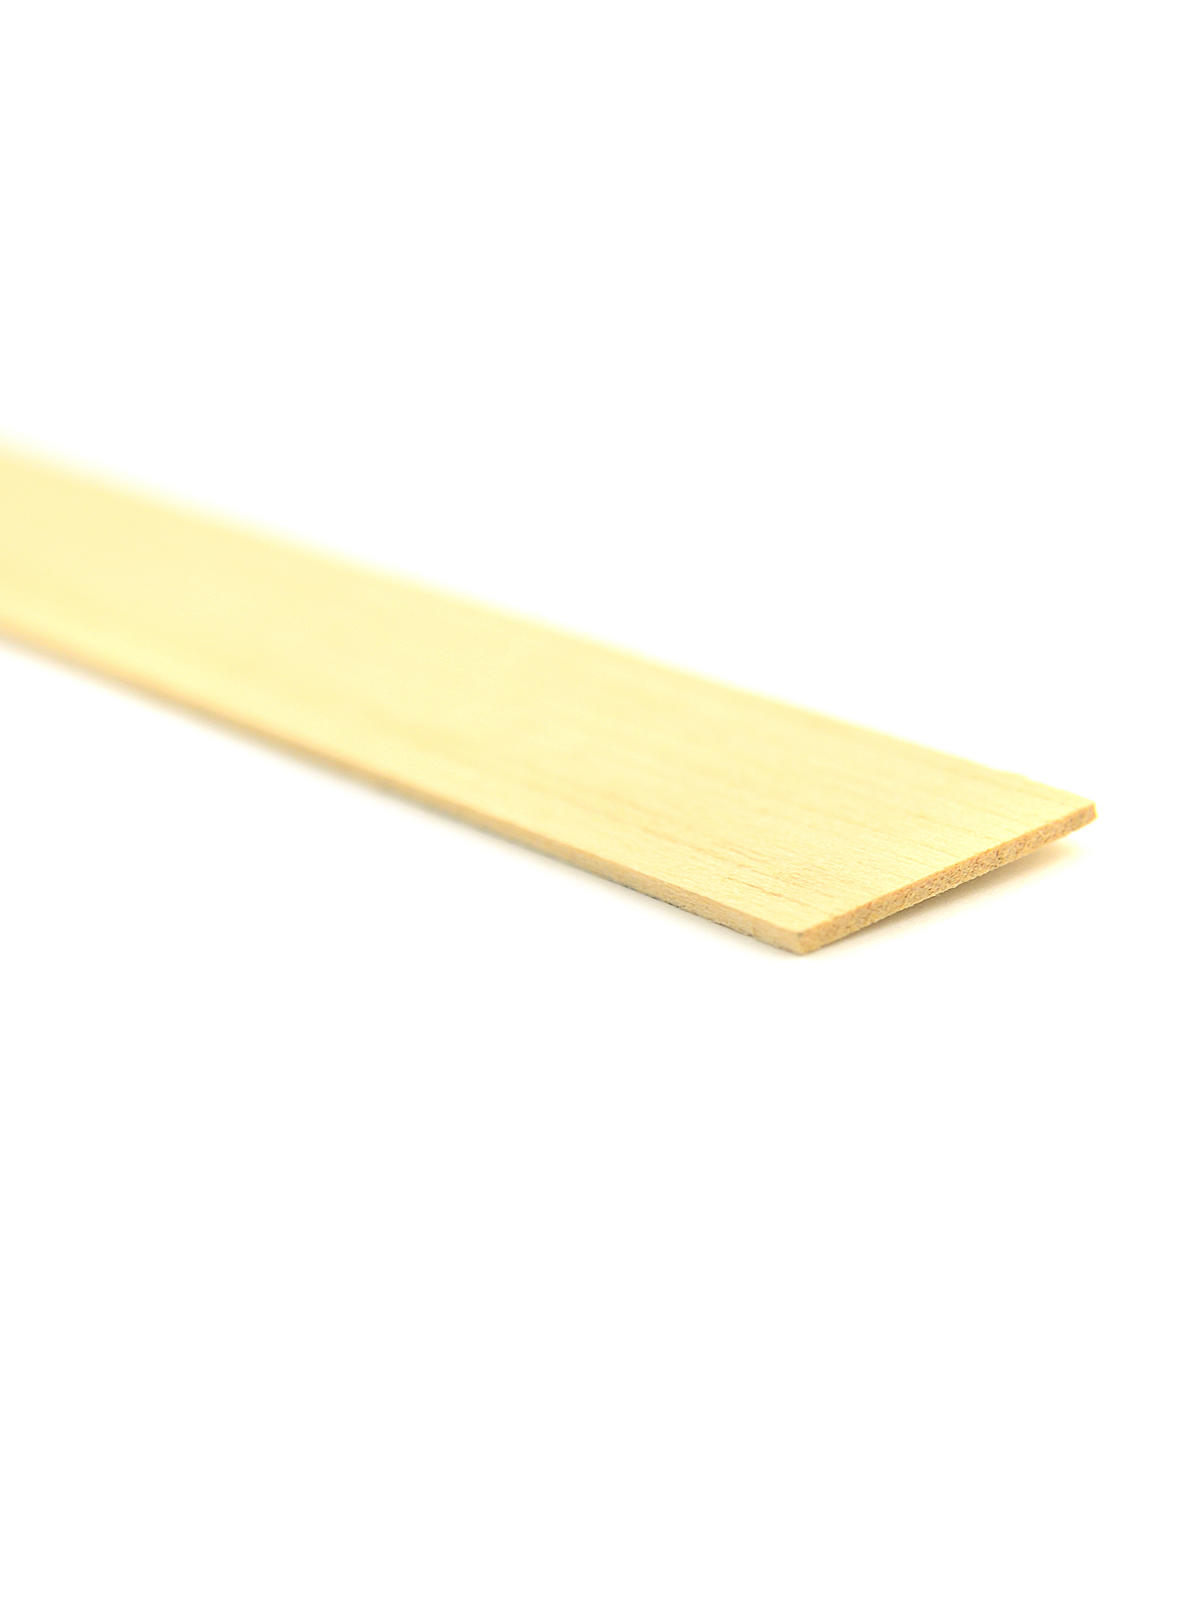 Basswood Sheets 1 16 In. 1 In. X 24 In.